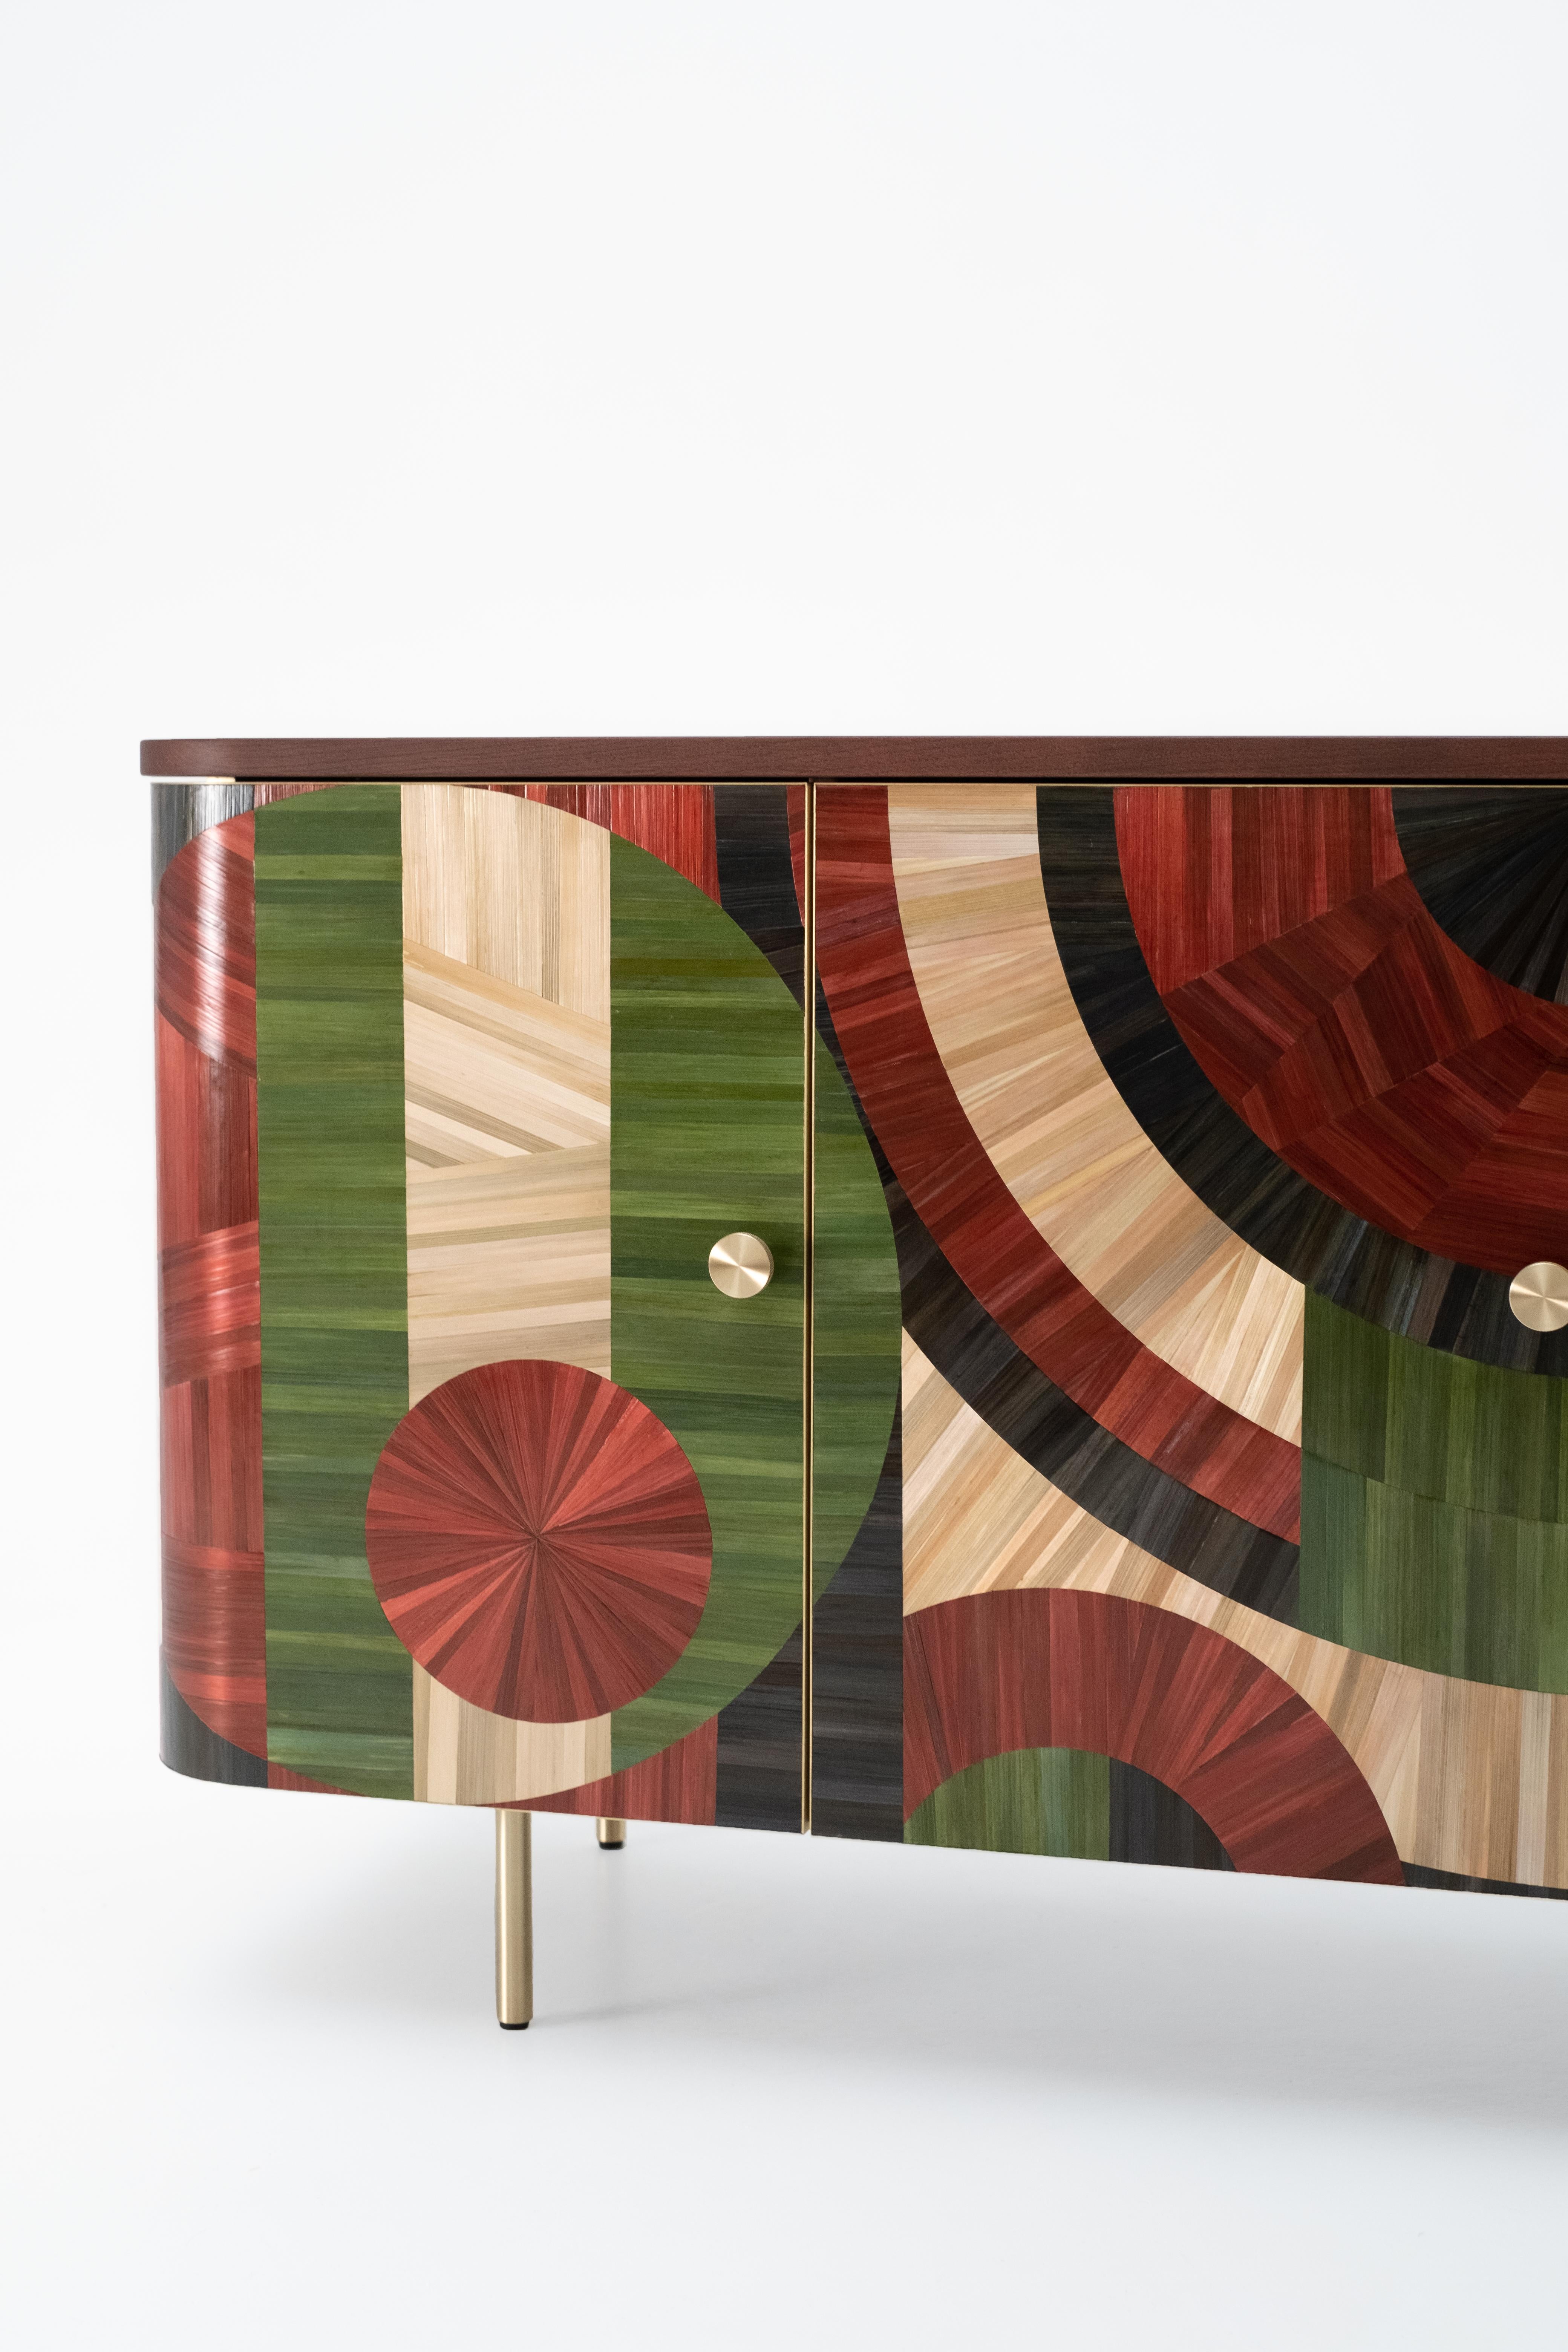 Ukrainian Solomia Straw Marquetry Art Deco Wood Cabinet Green Red Black by RUDA Studio For Sale